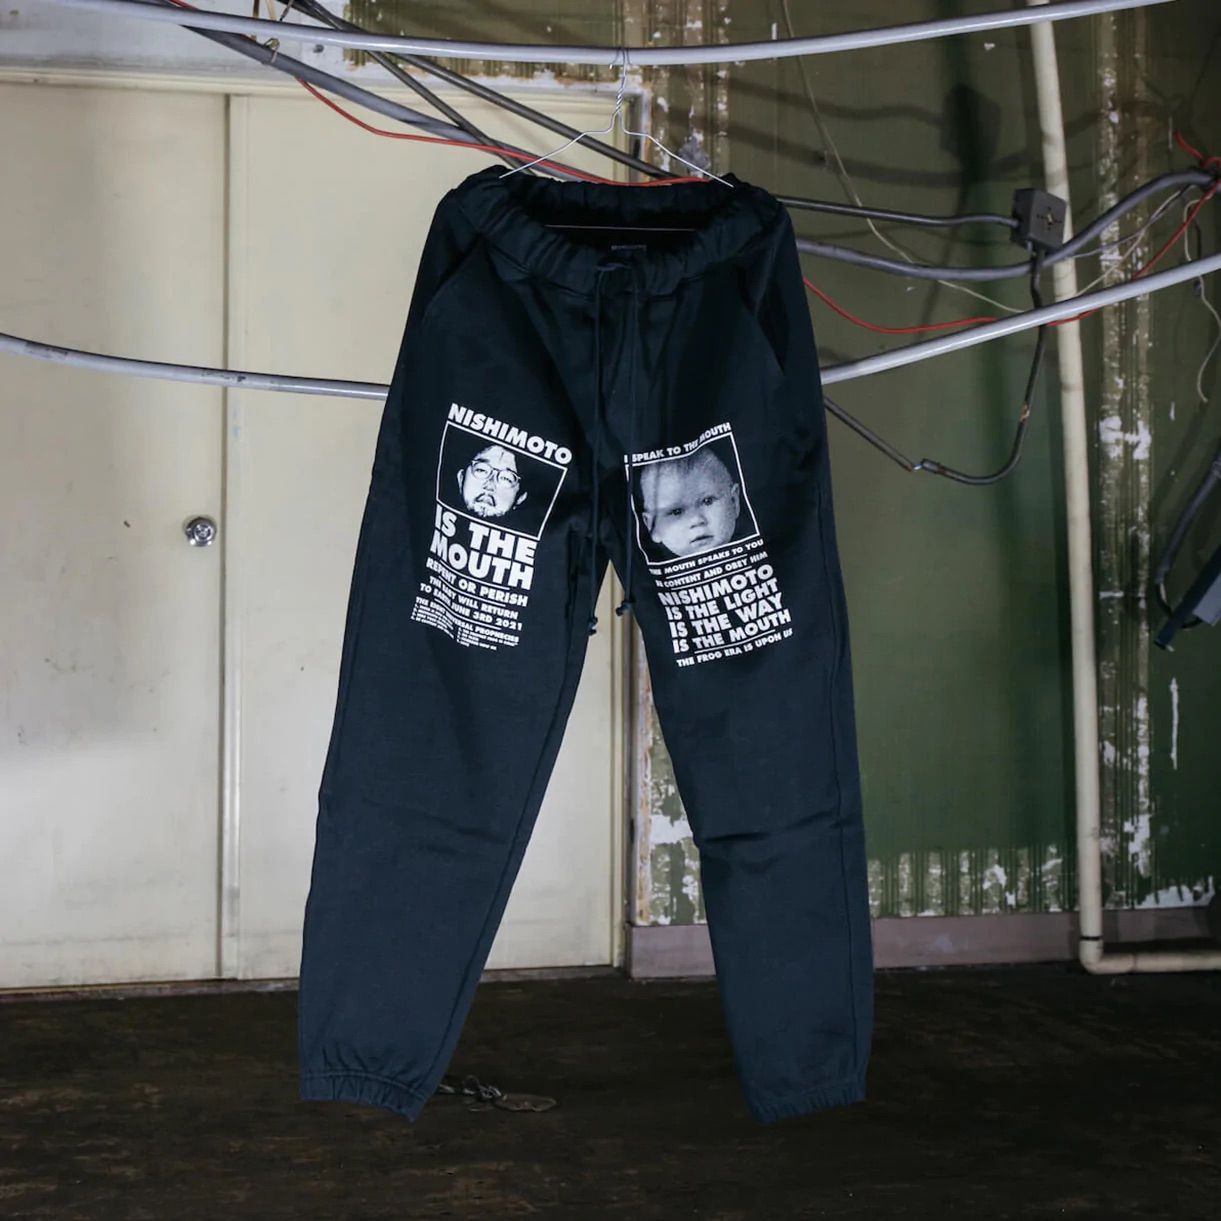 NISHIMOTO IS THE MOUTH - 【残りわずか】Classic Sweat Pants